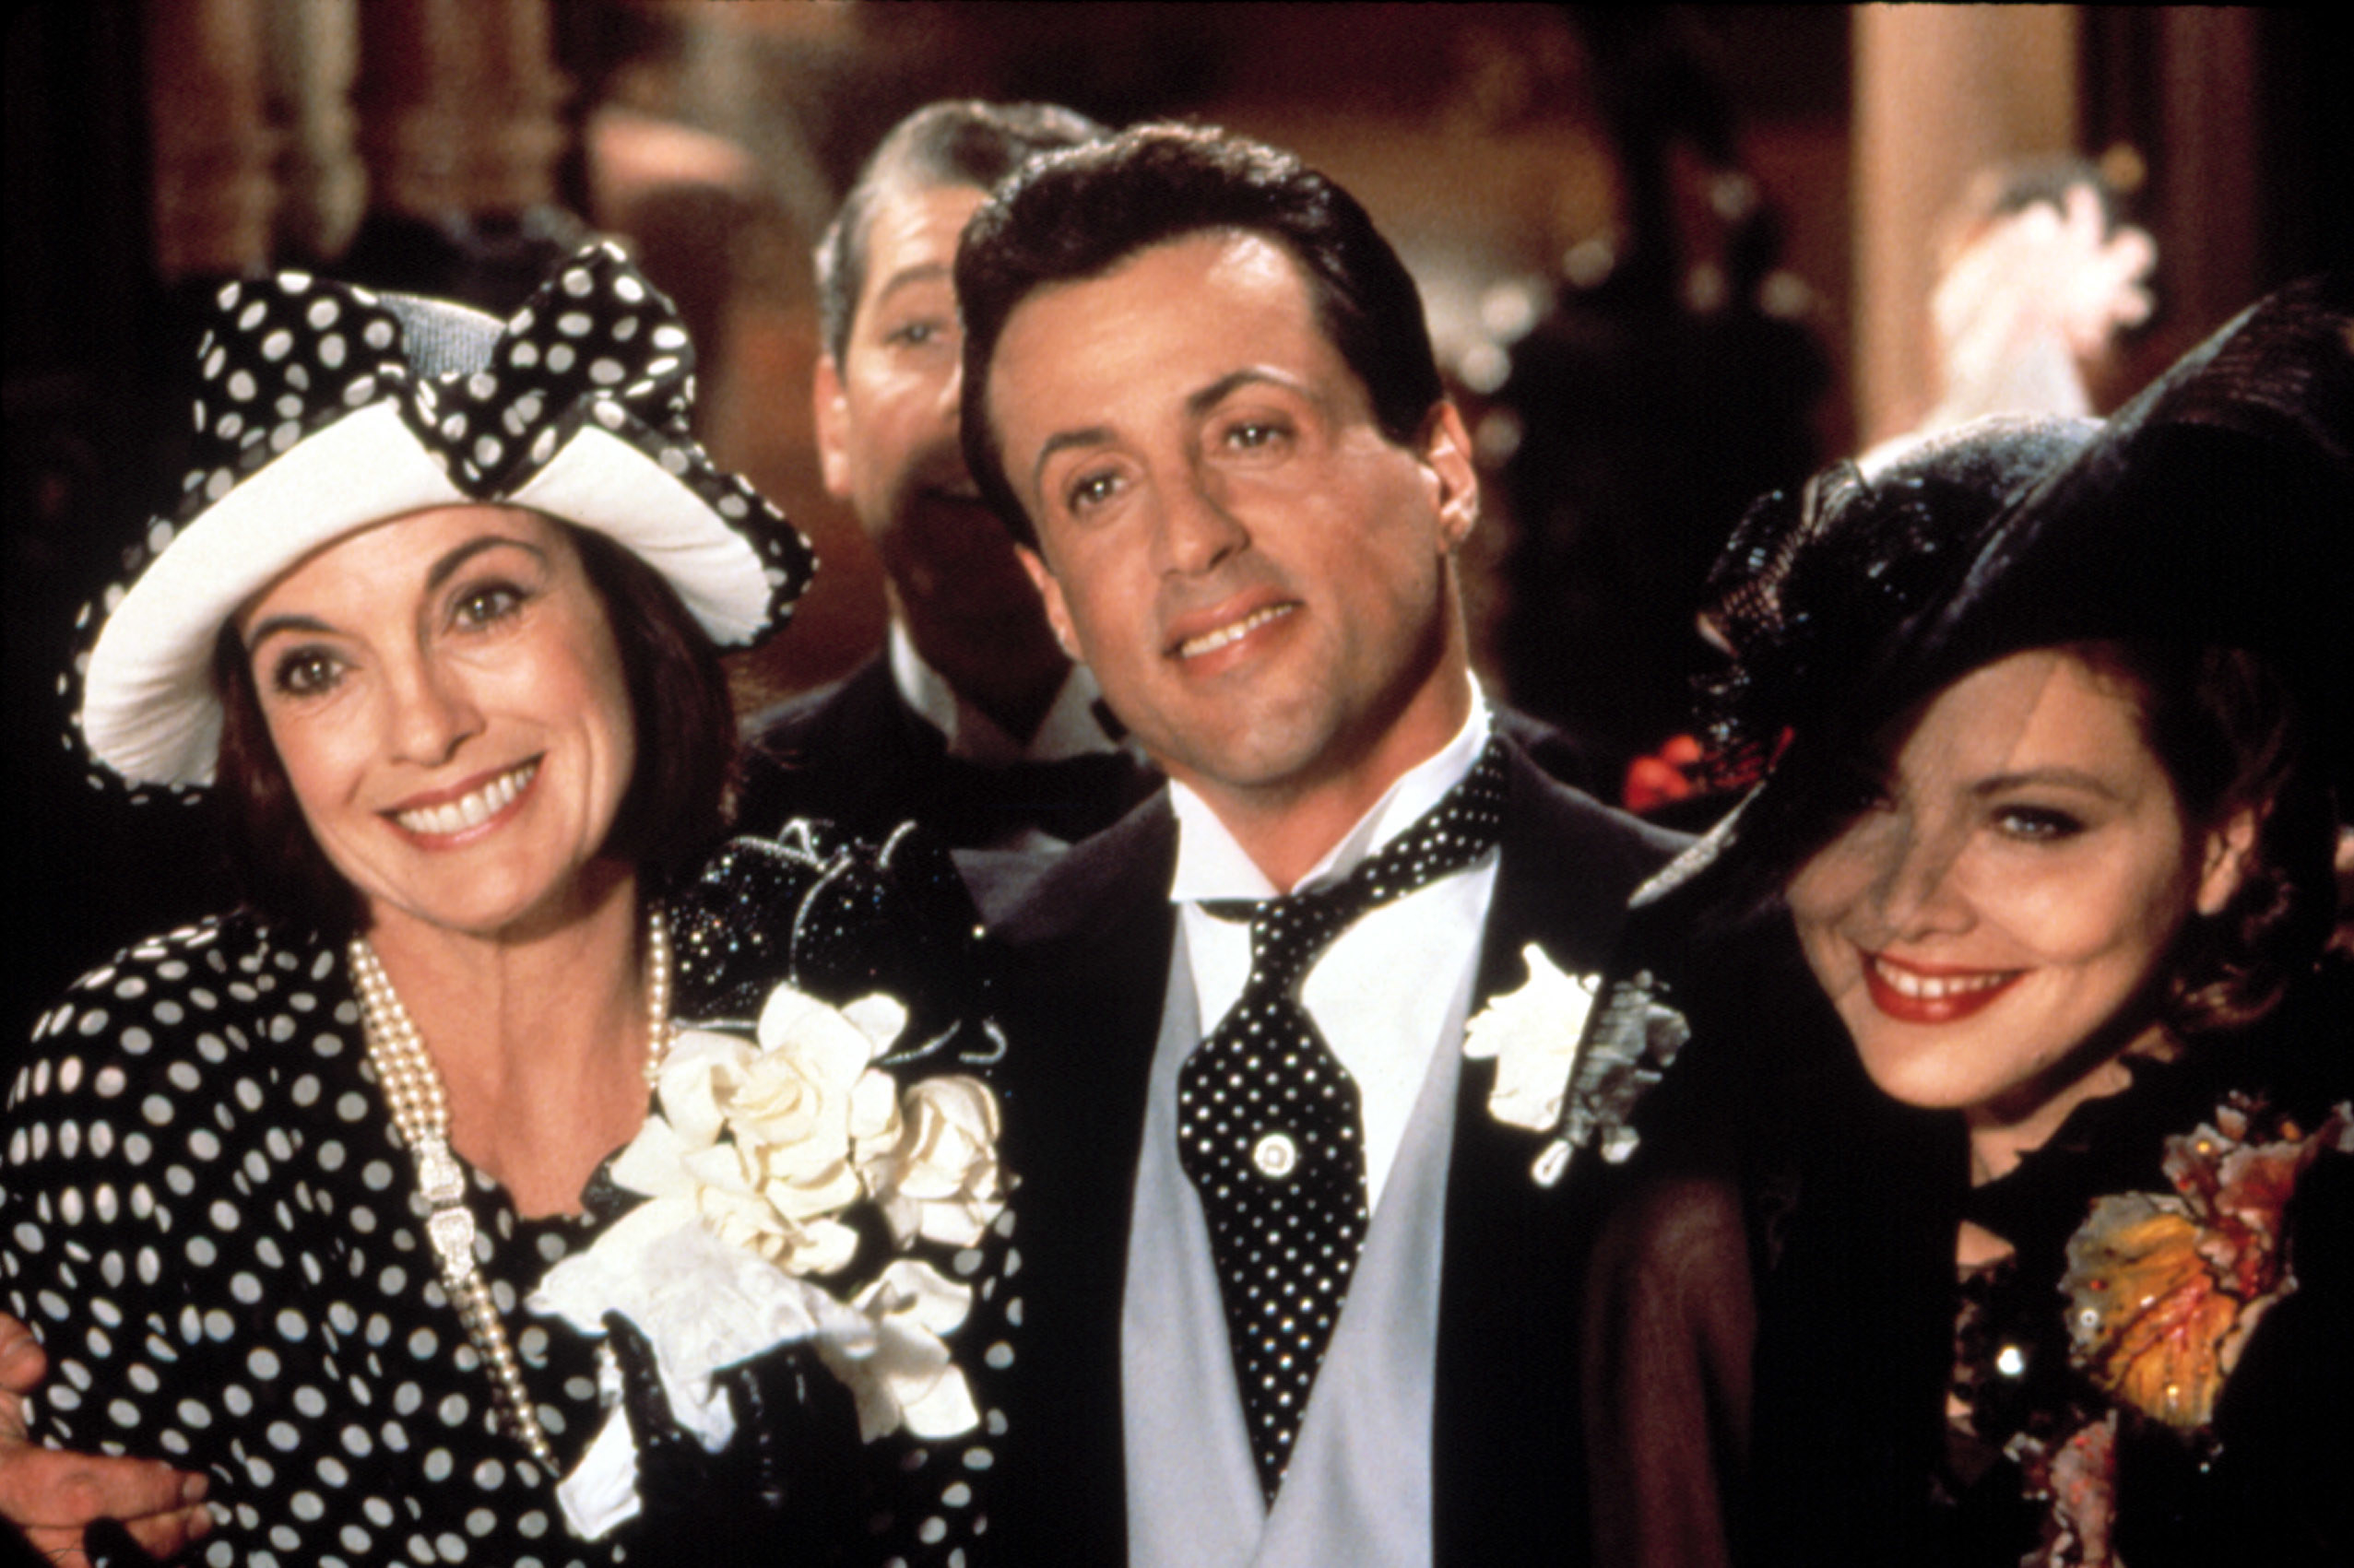 Linda Gray, Sylvester Stallone, Ornella Muti dressed in fancy clothes for a party, smiling